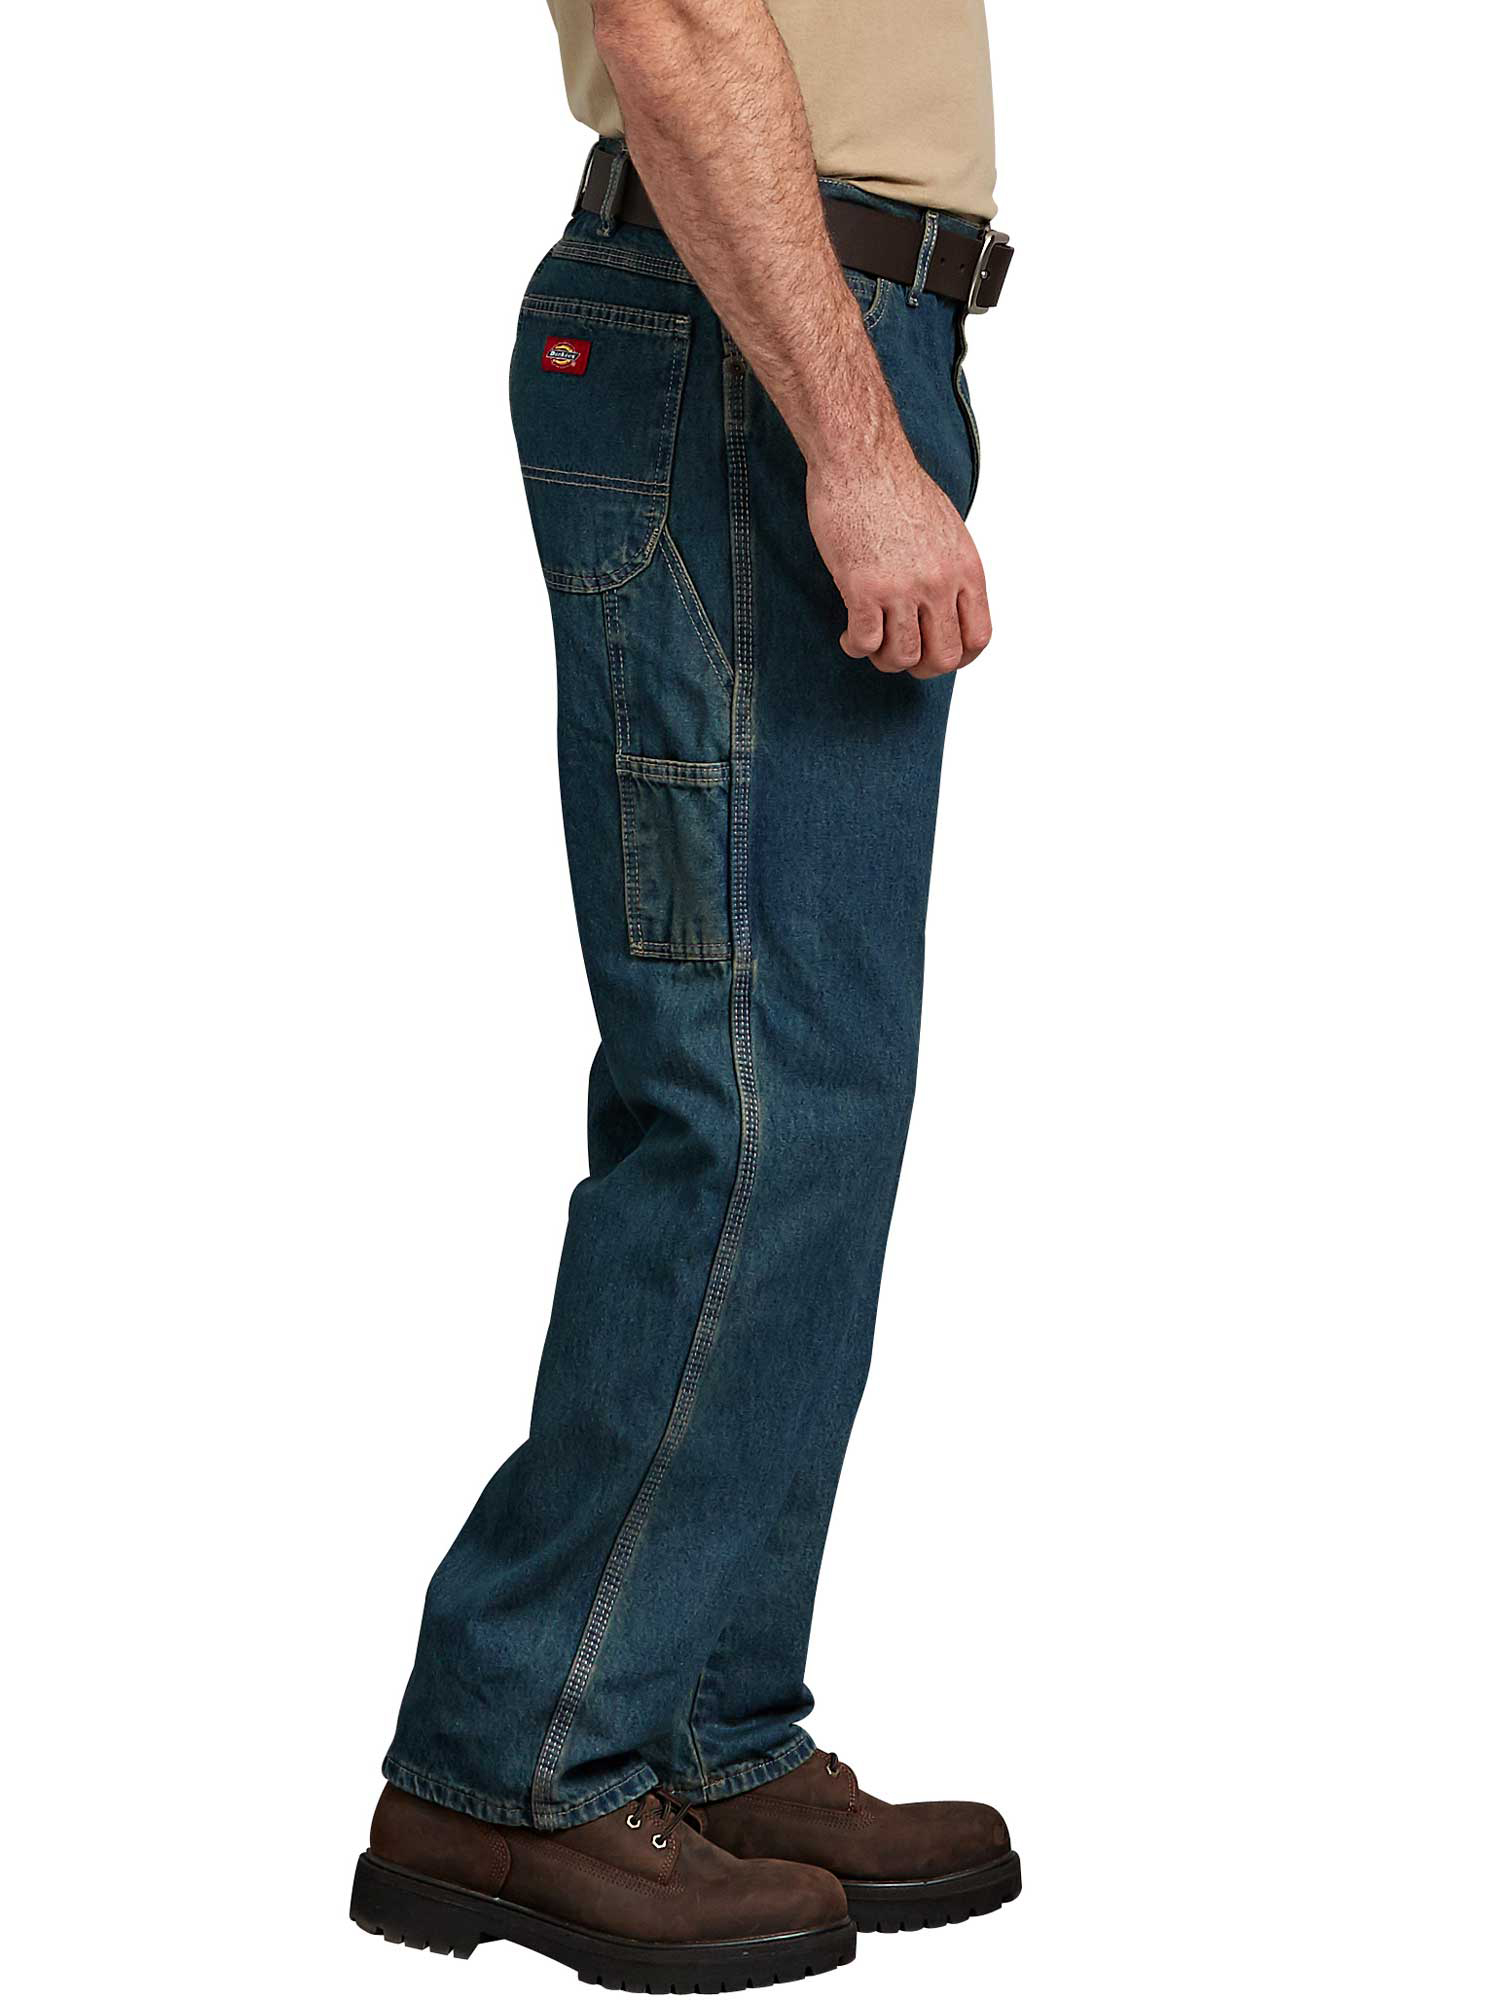 Dickies Mens and Big Mens Relaxed Fit Stonewashed Carpenter Denim Jeans - image 2 of 3